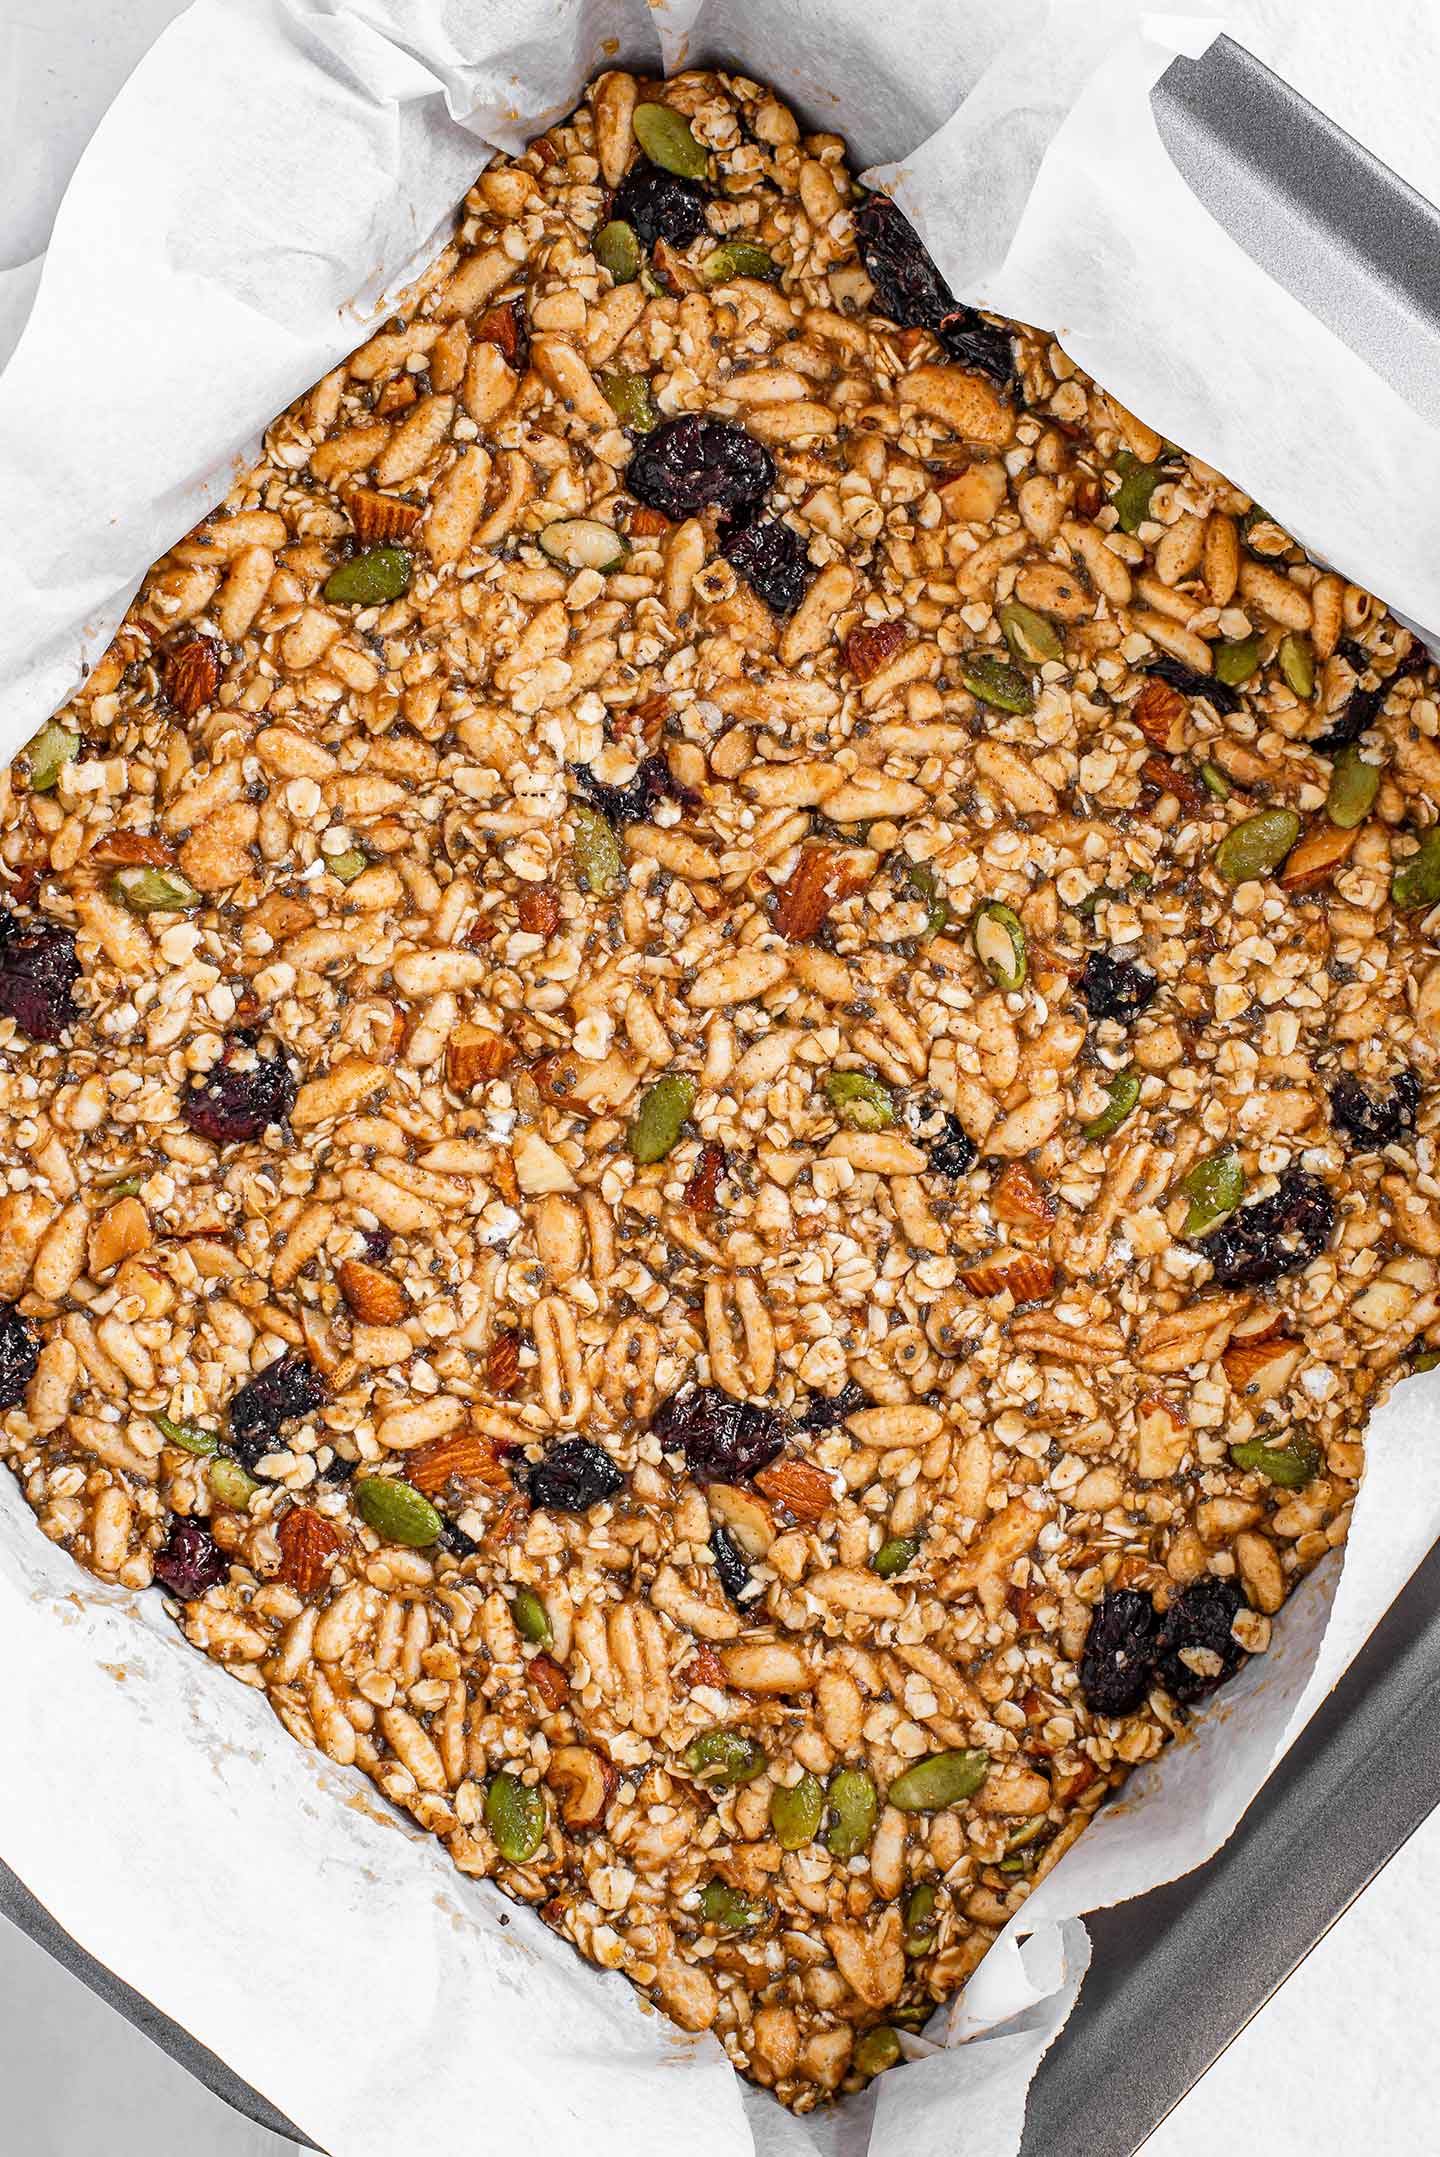 Top down view of the granola bar mixture packed into a square baking tin lined with parchment paper. The mixture looks warm and golden with dried fruit, nuts, and seeds, speckled throughout the puffed rice and oats.